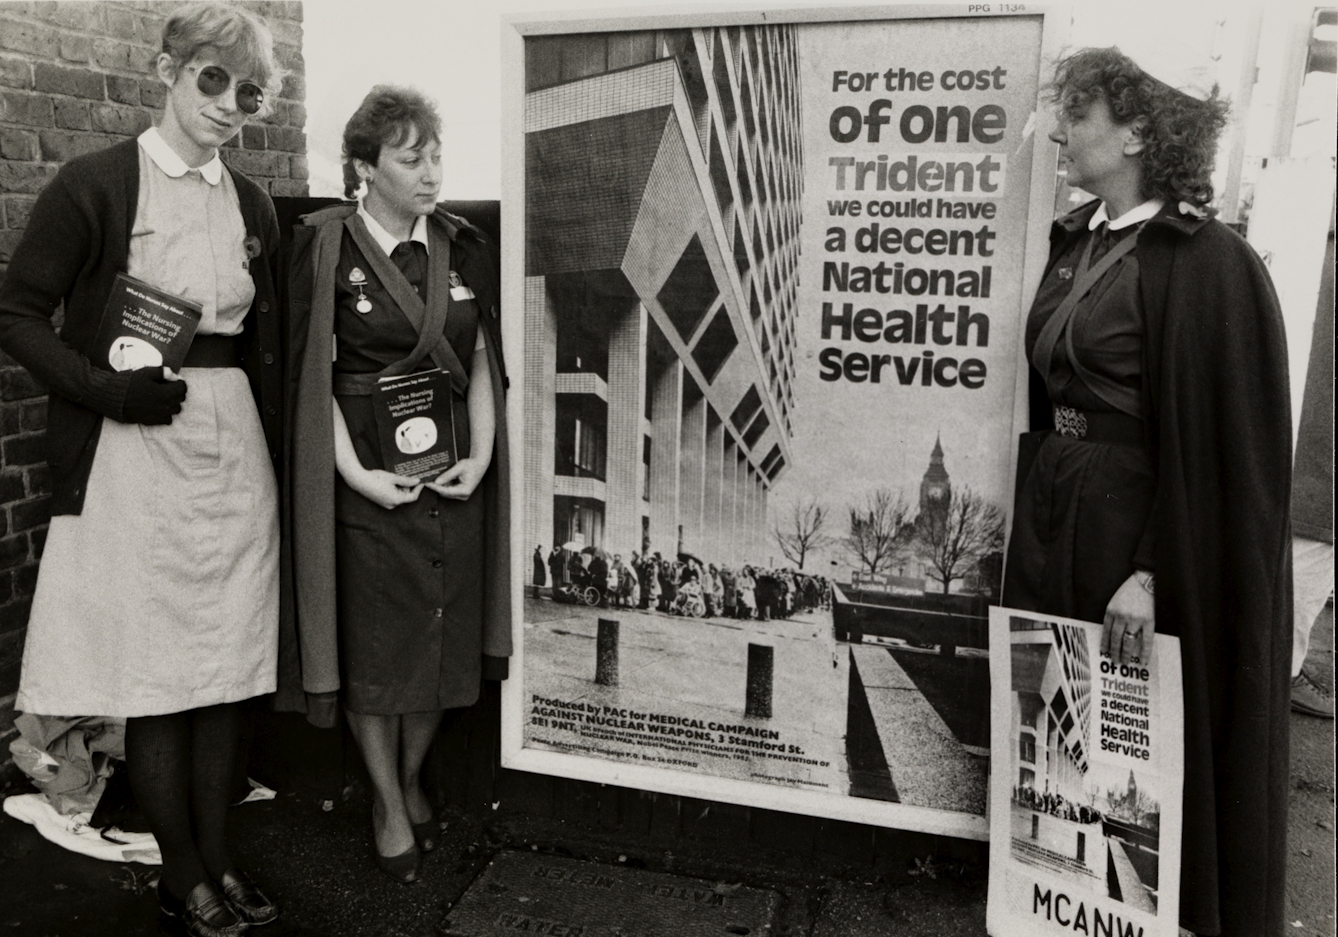 Black and white photograph of three nurses in uniform protesting about spending money on nuclear weapons rather than healthcare. They stand either side of a poster that reads "For the cost of one Trident we could have a decent National Health Service."